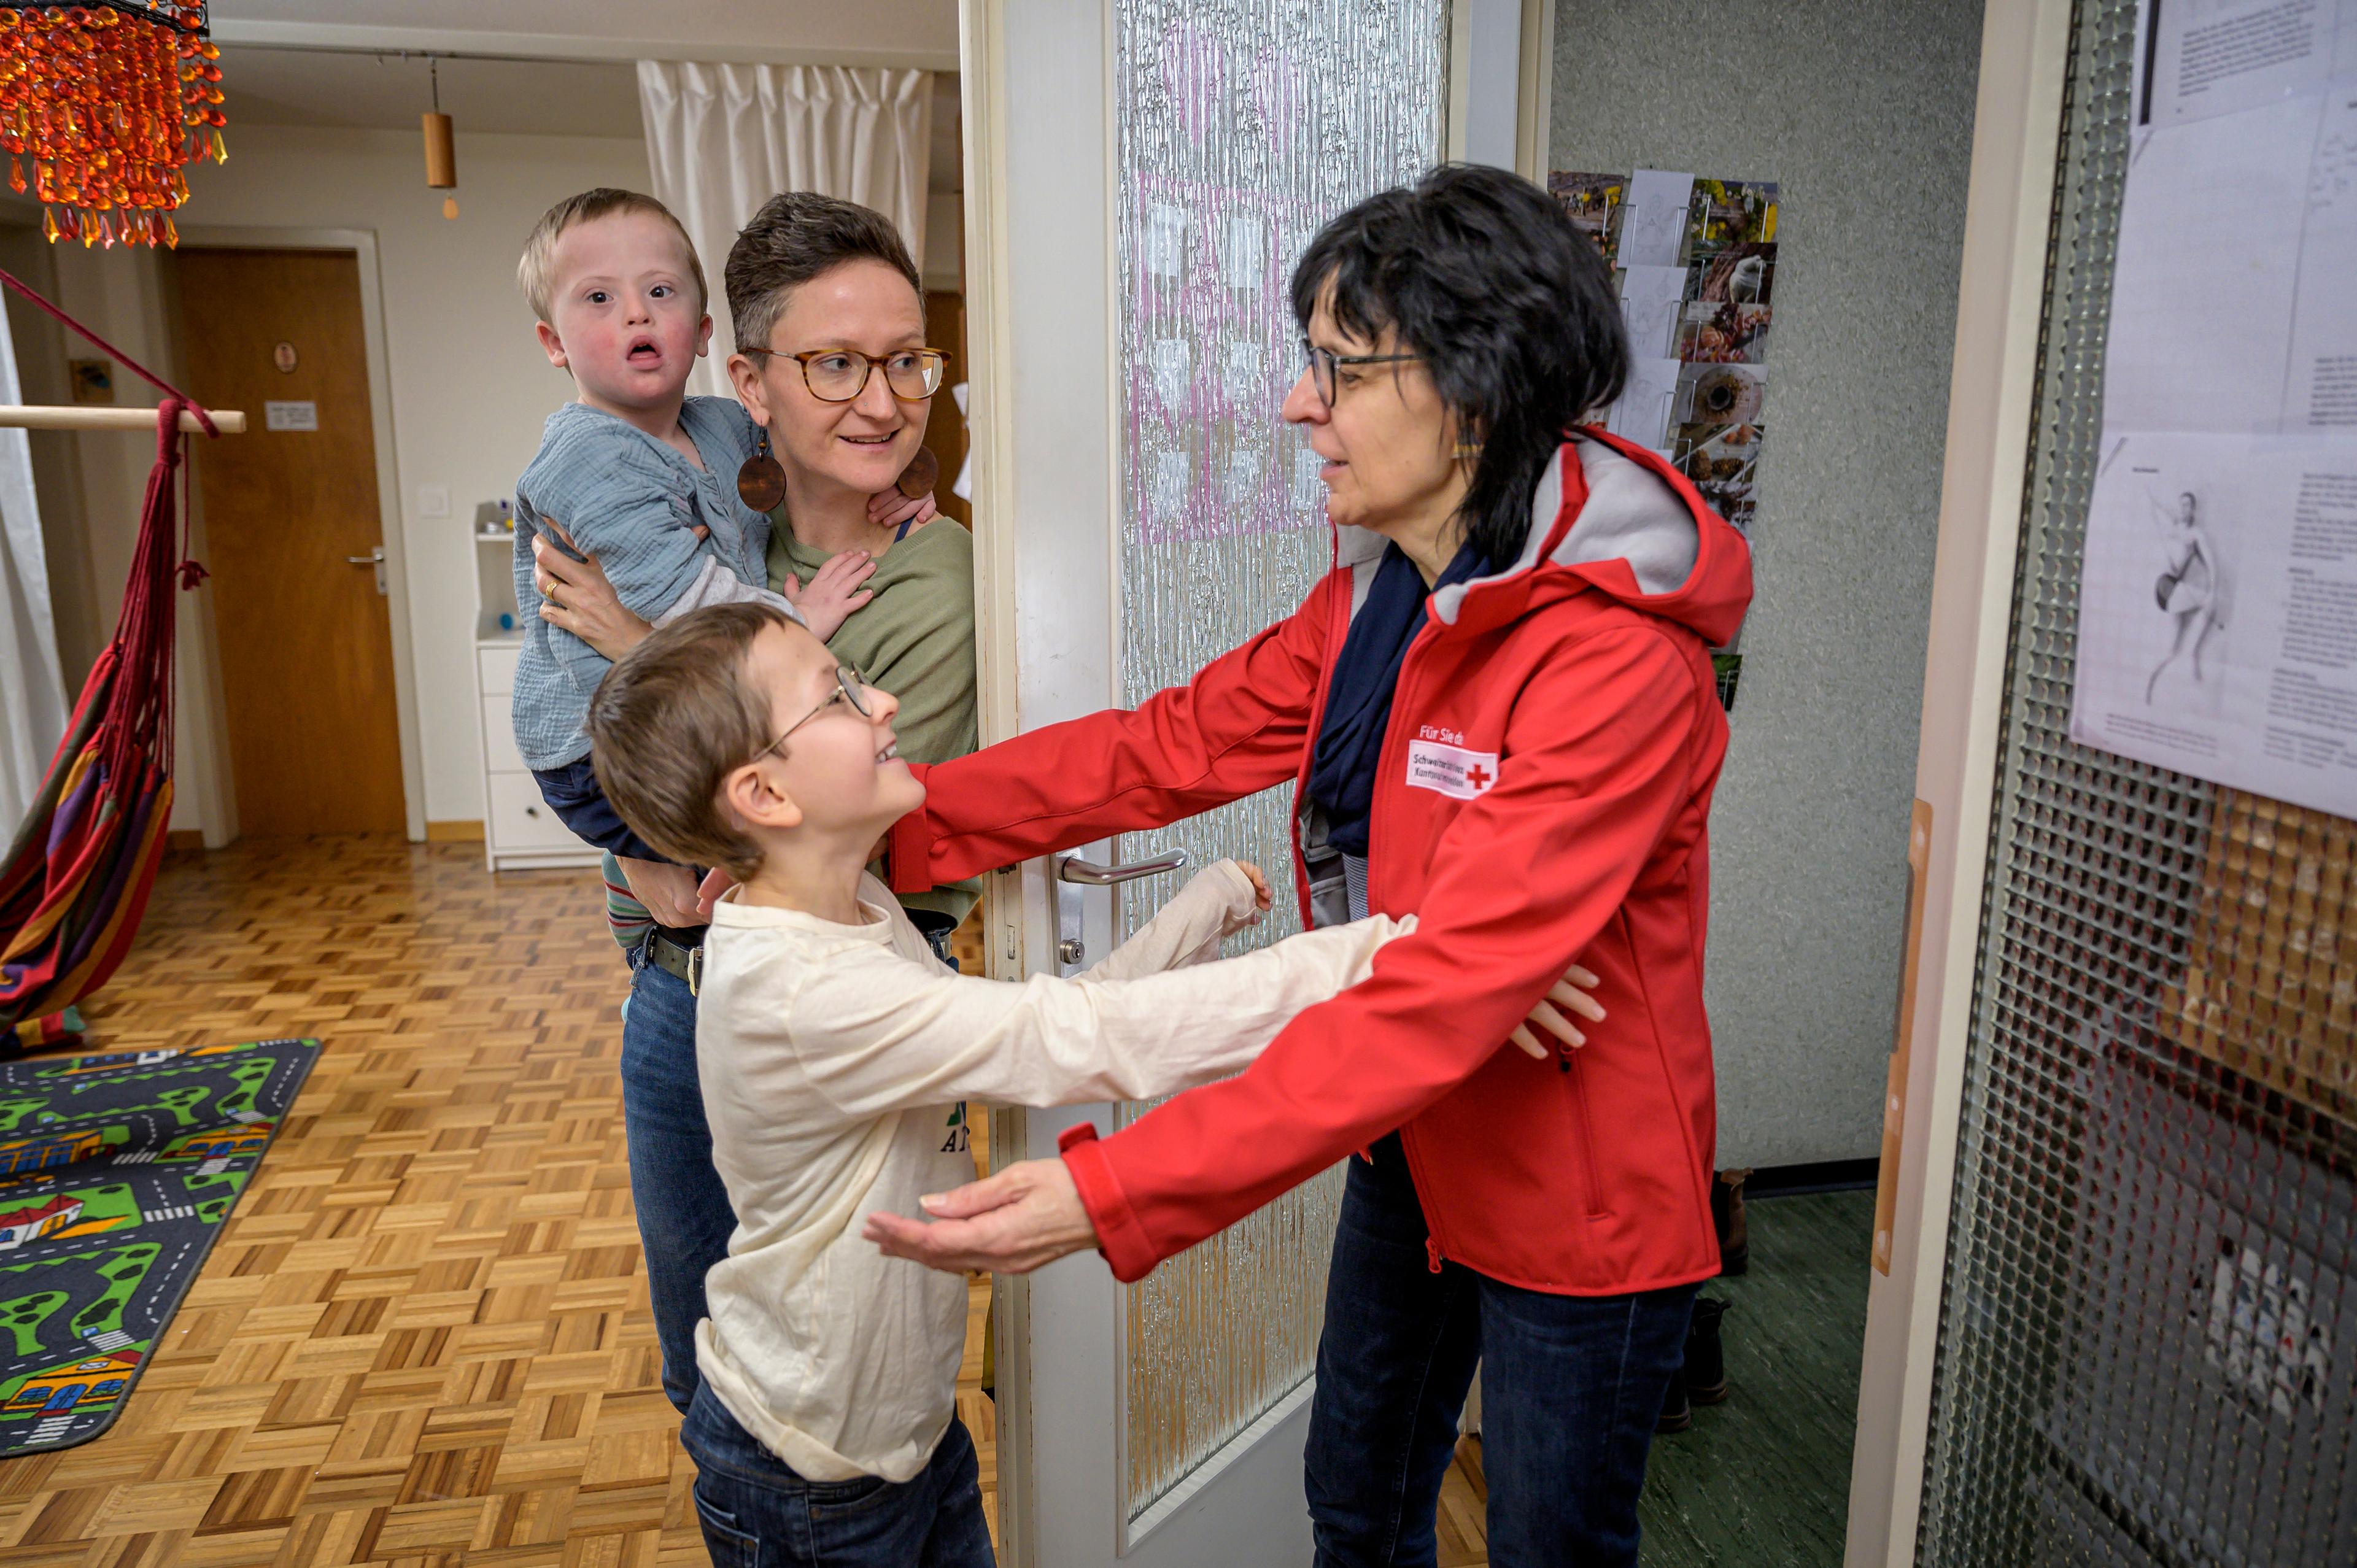 Mother with small child with trisomy 21 in her arms. a child of about 10 years greets the woman with the red jacket and the Red Cross logo.